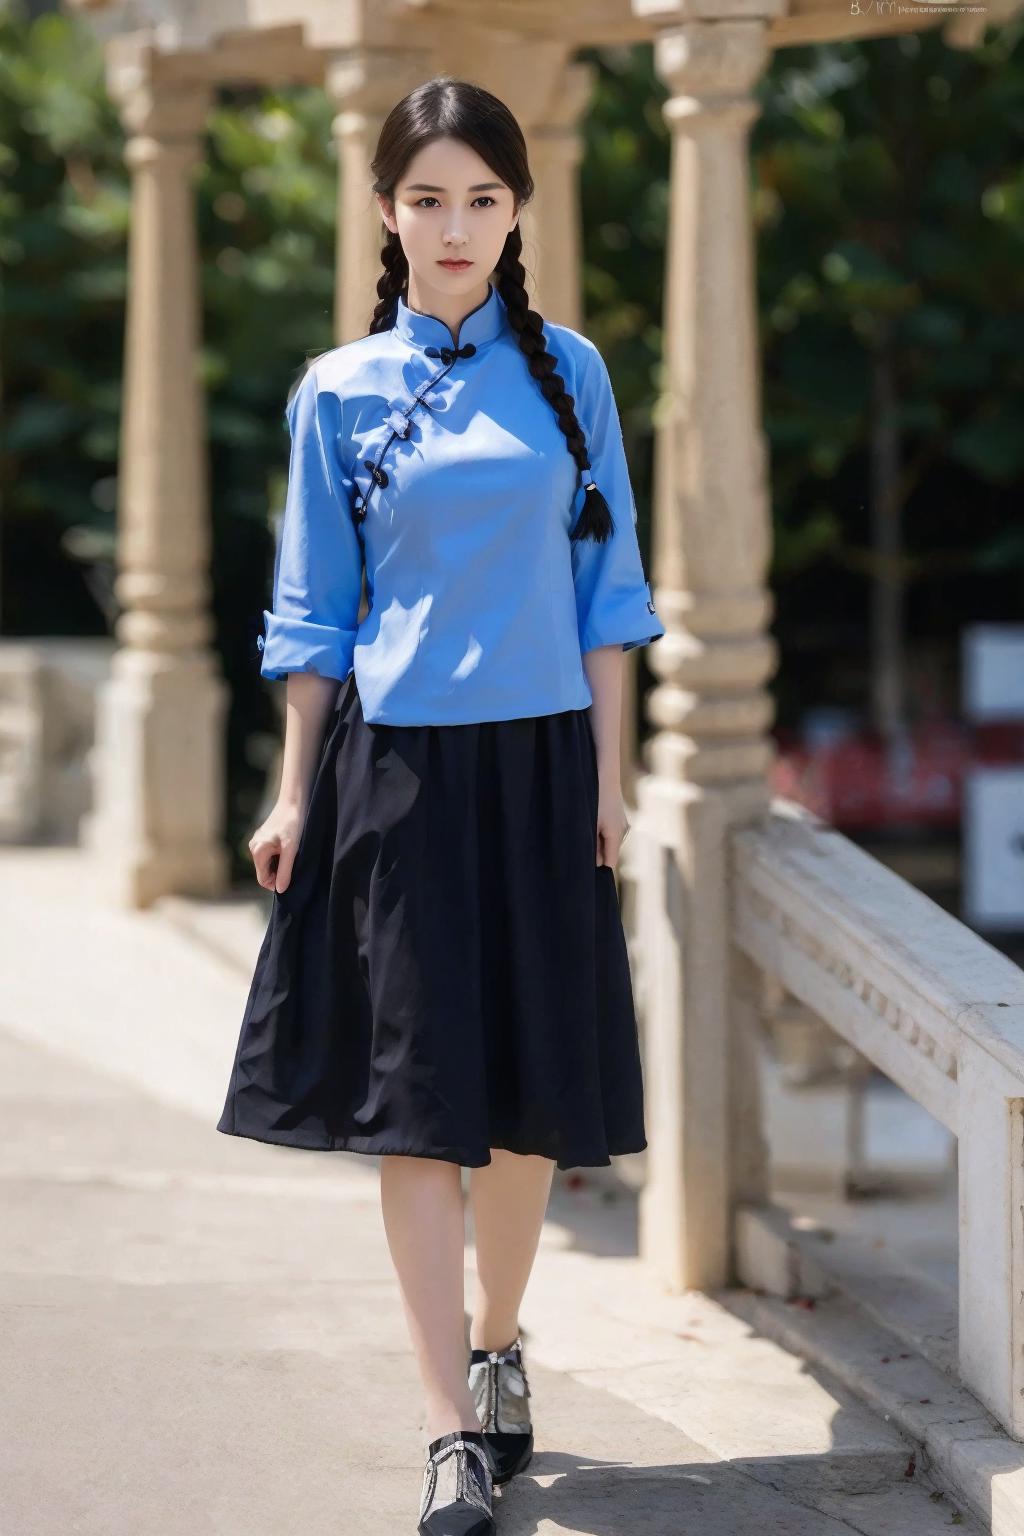 China Republican period female student uniform image by agger